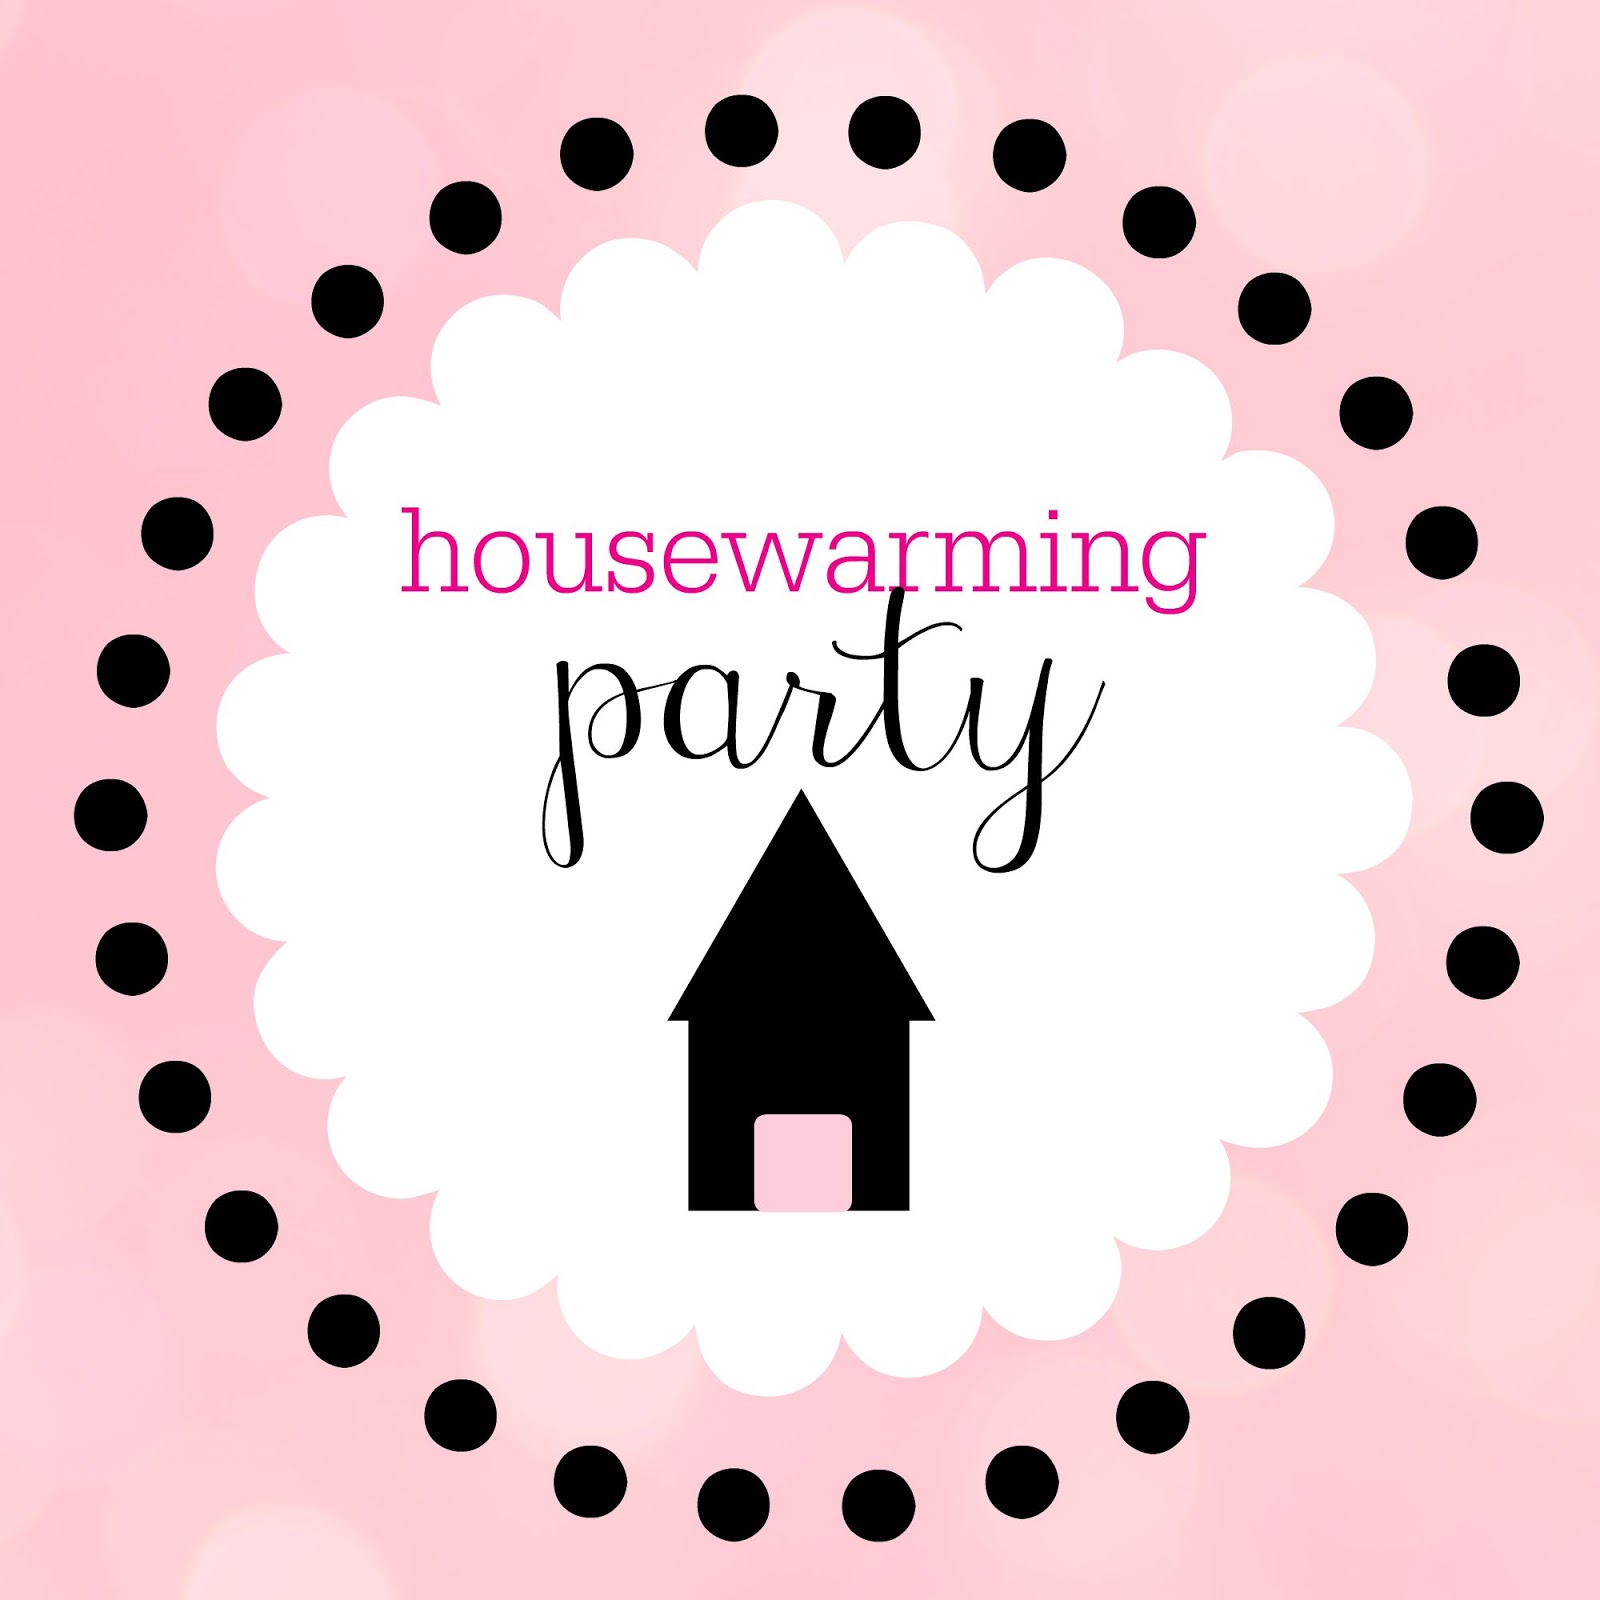 51 images of housewarming clipart. 